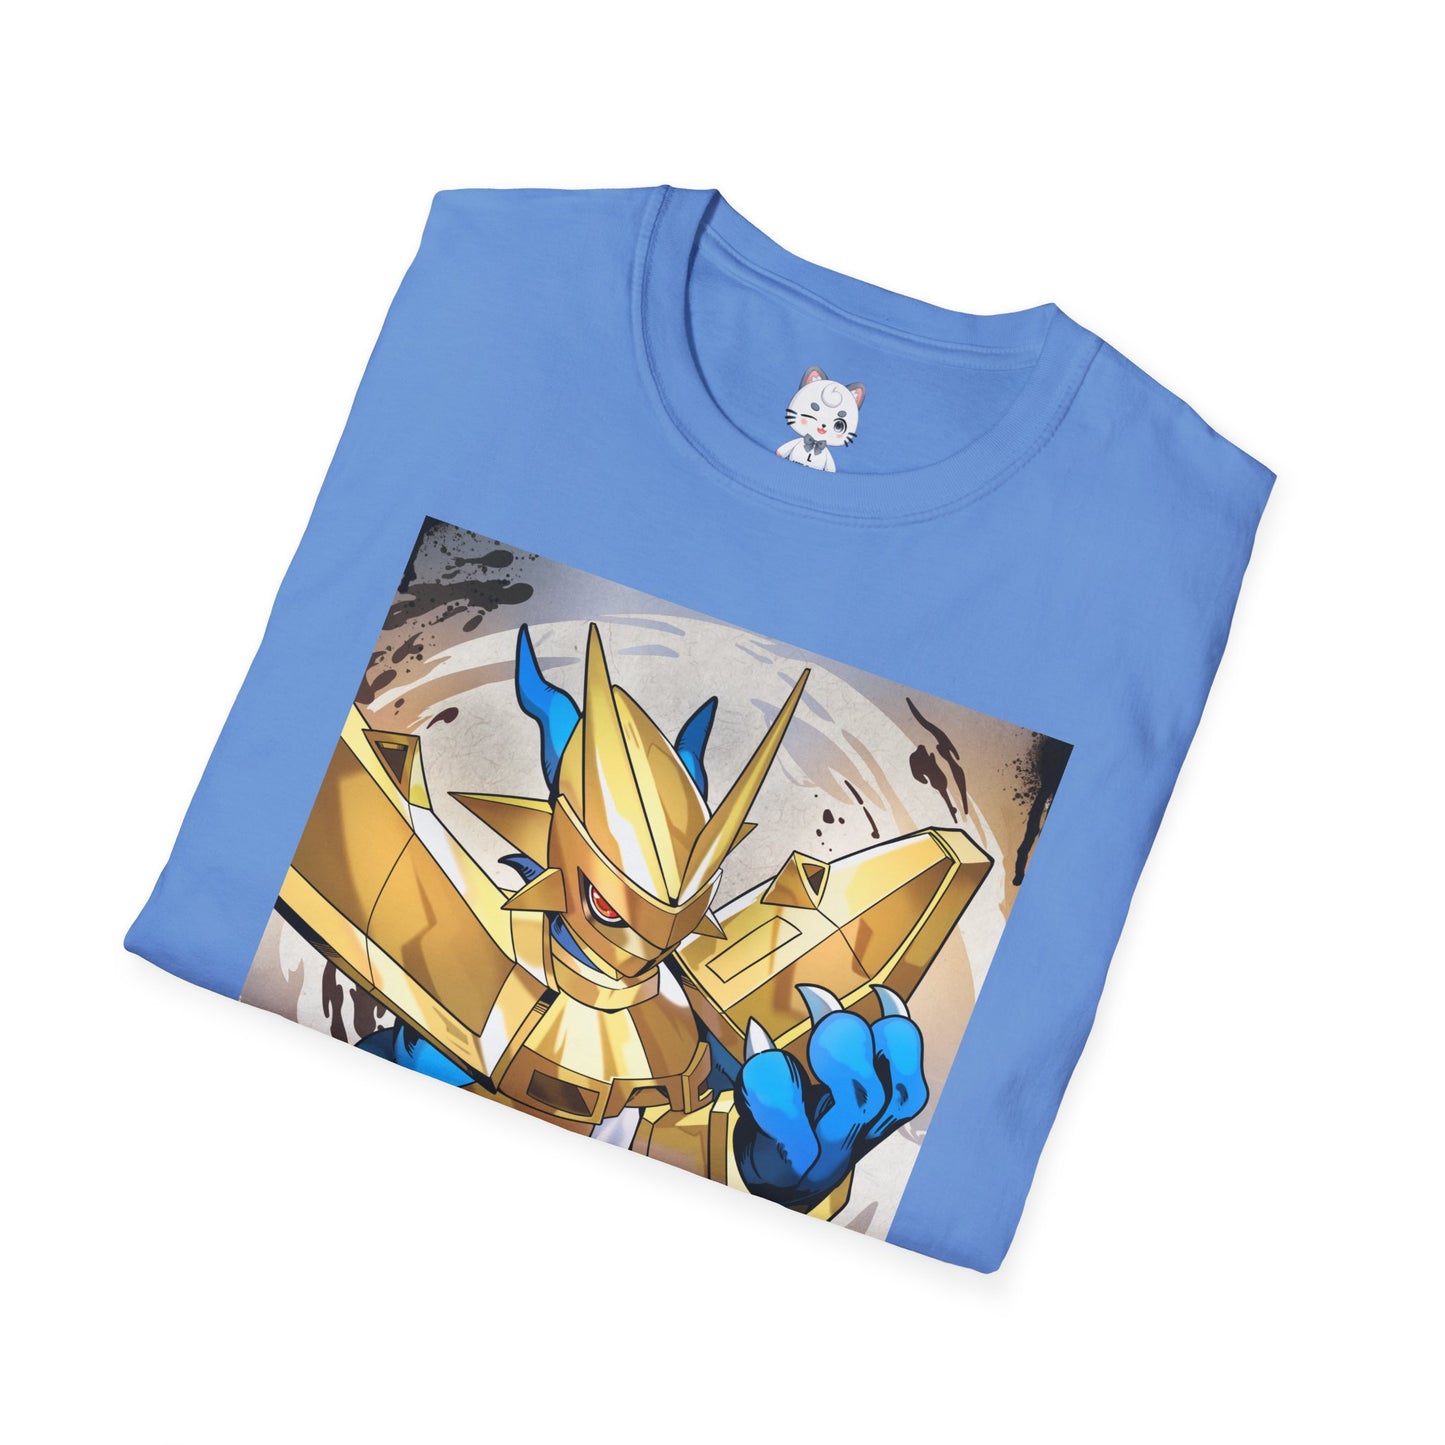 Digimon Magnamon T-Shirt Design by Currynoodleart